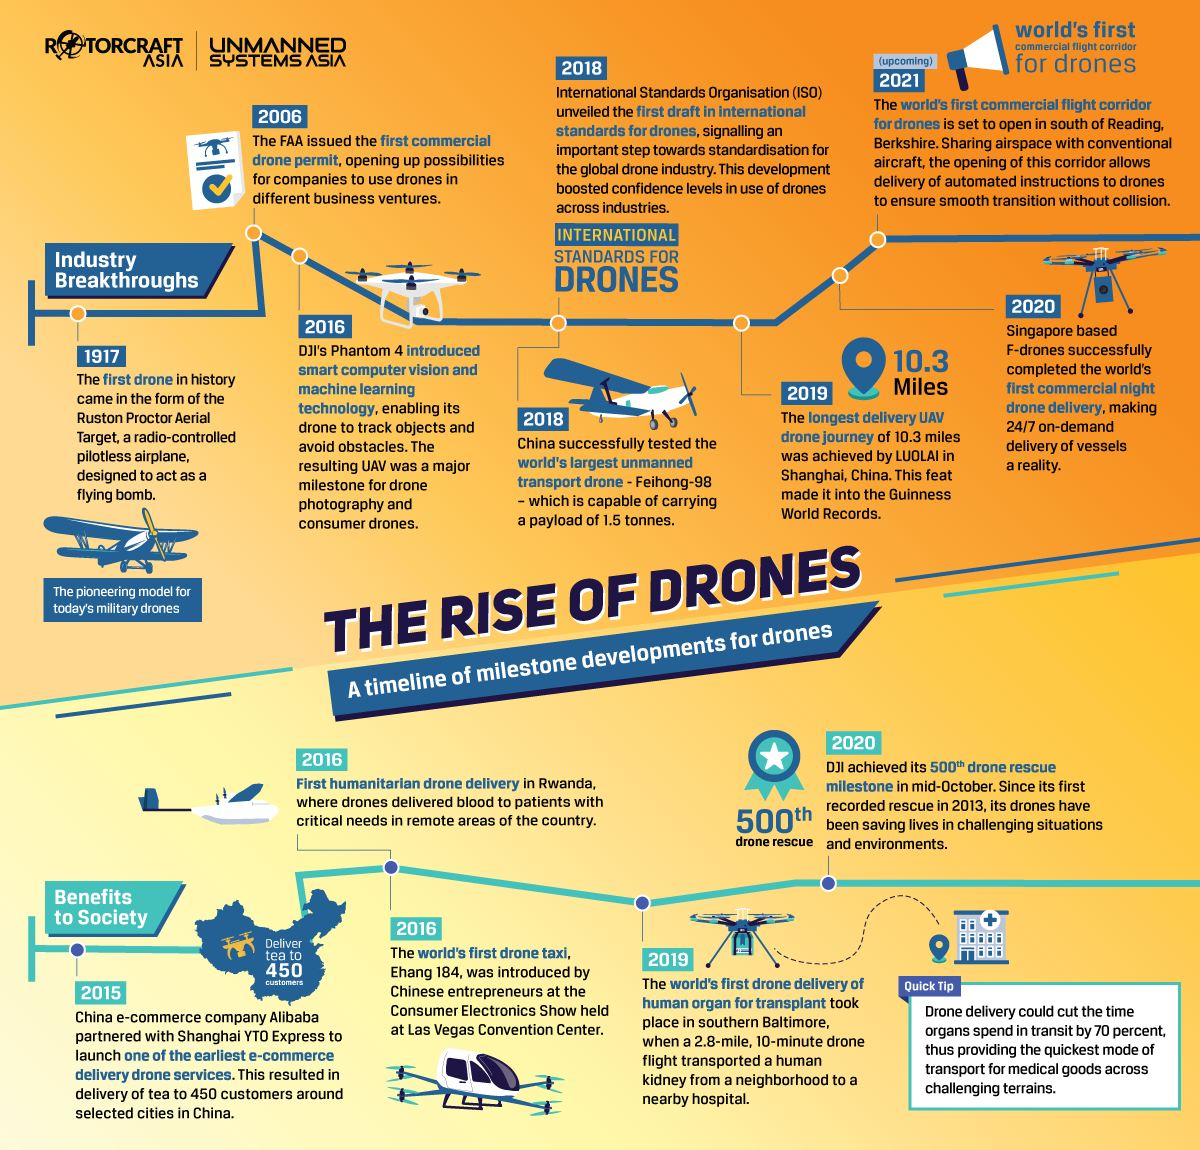 A timeline of milestone developments for drones